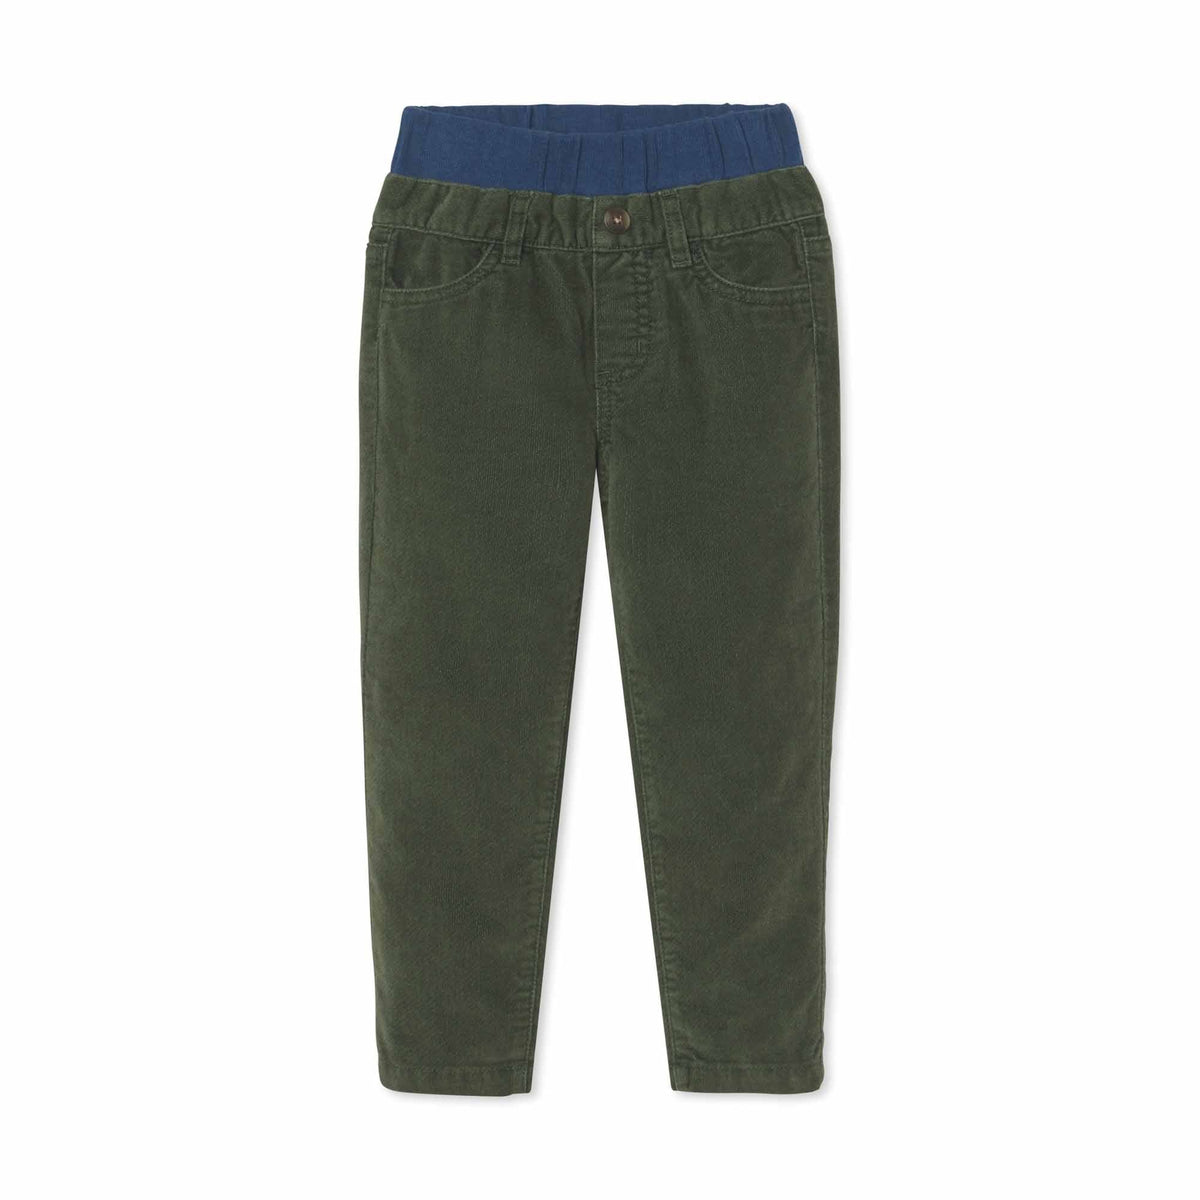 Classic and Preppy Washed Cord Gage 5 Pocket Pants, Rifle Green-Bottoms-Rifle Green-2T-CPC - Classic Prep Childrenswear